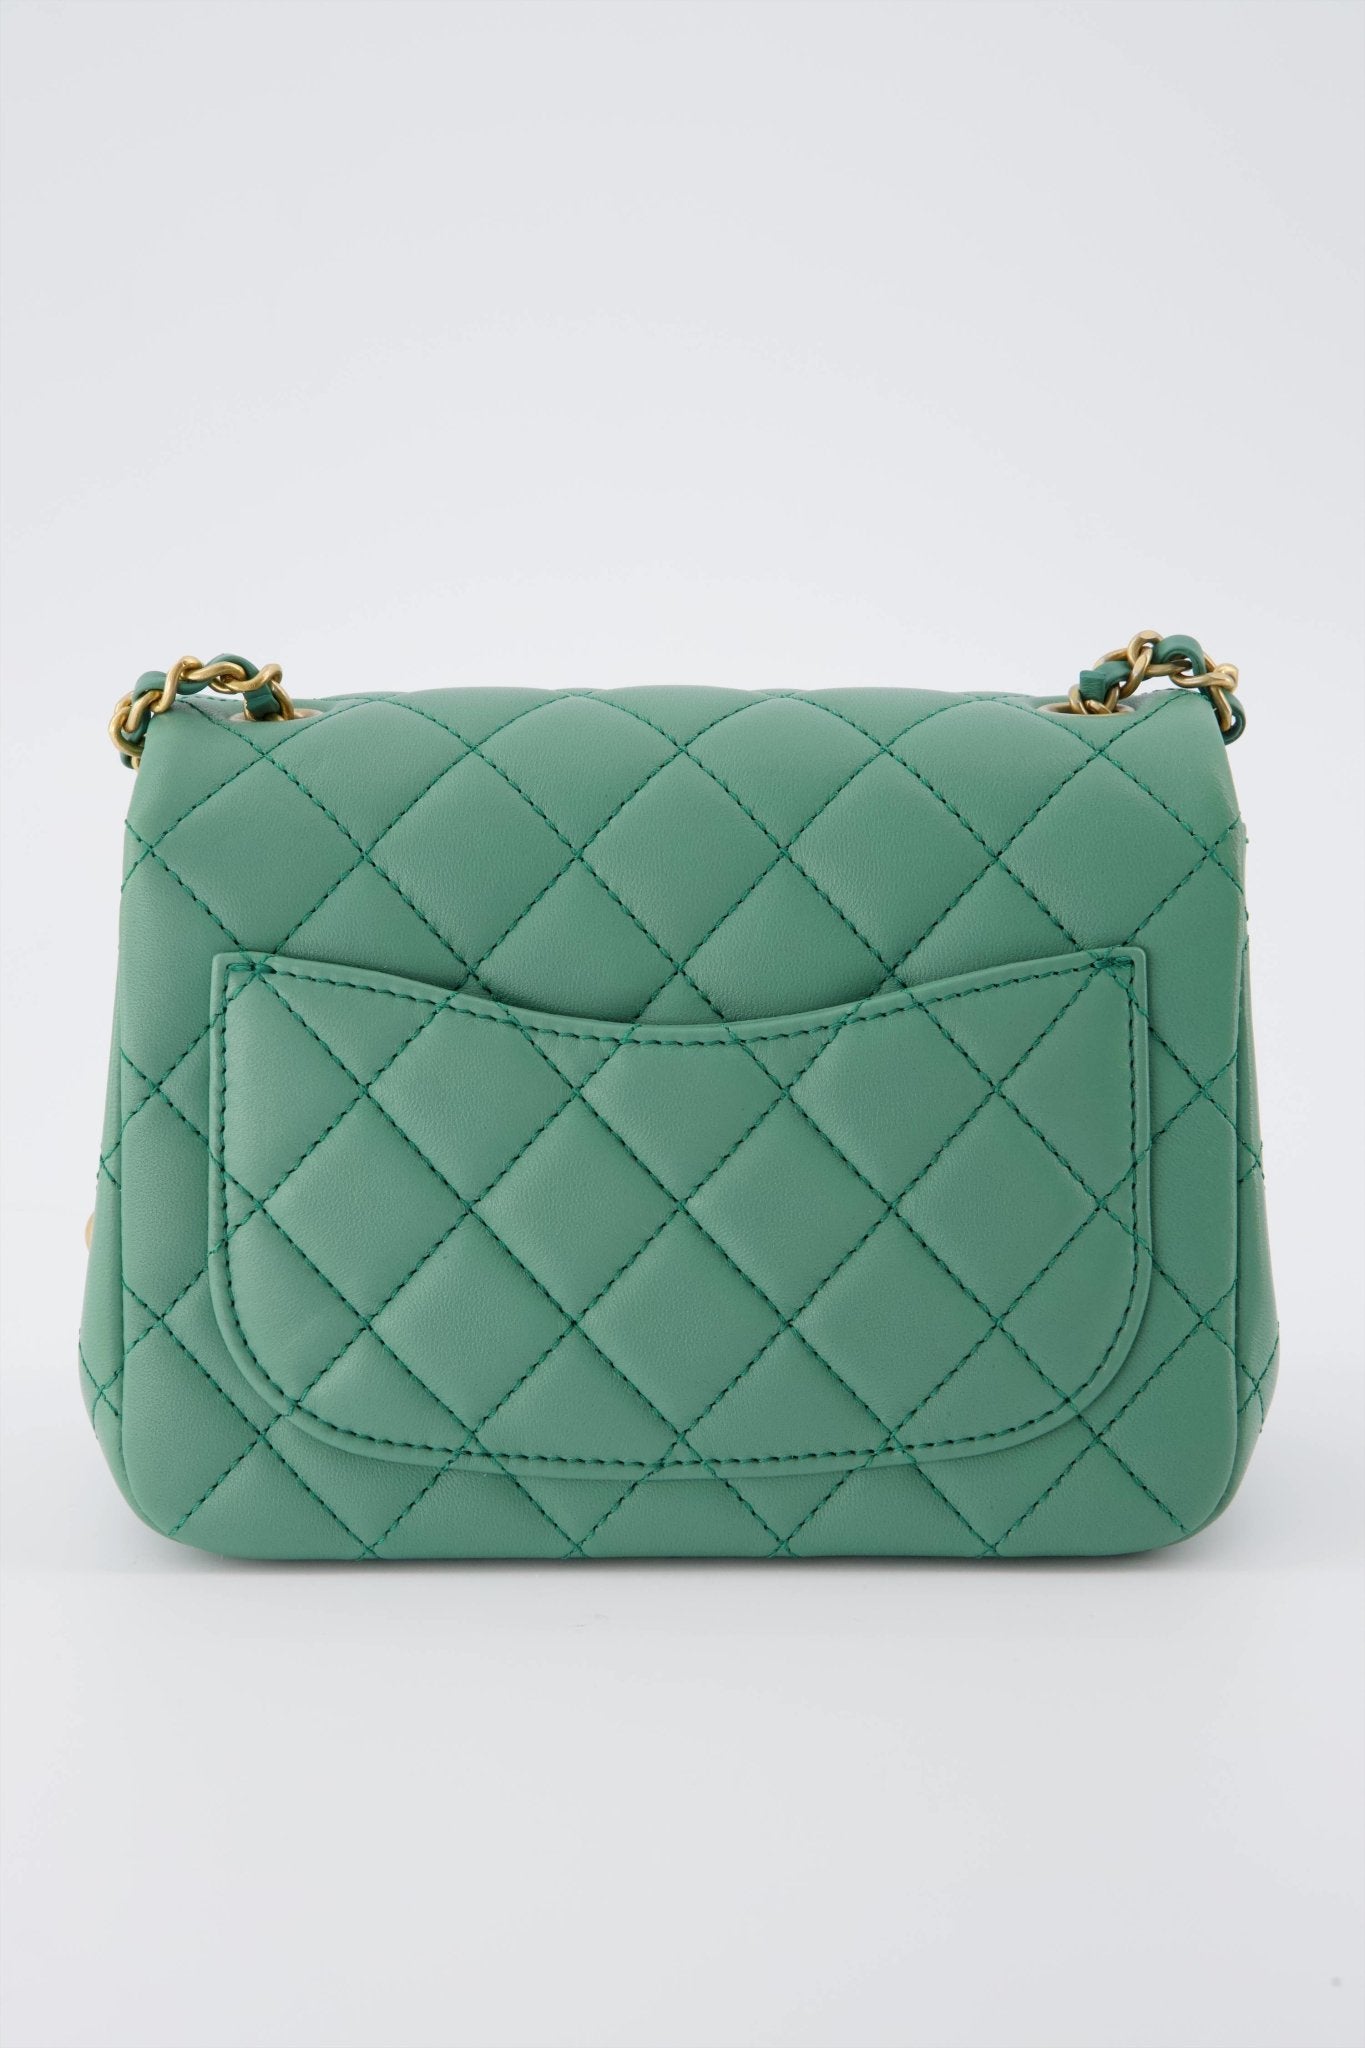 Rare* Chanel Green Pearl Crush Mini Square Flap Bag With Brushed Gold